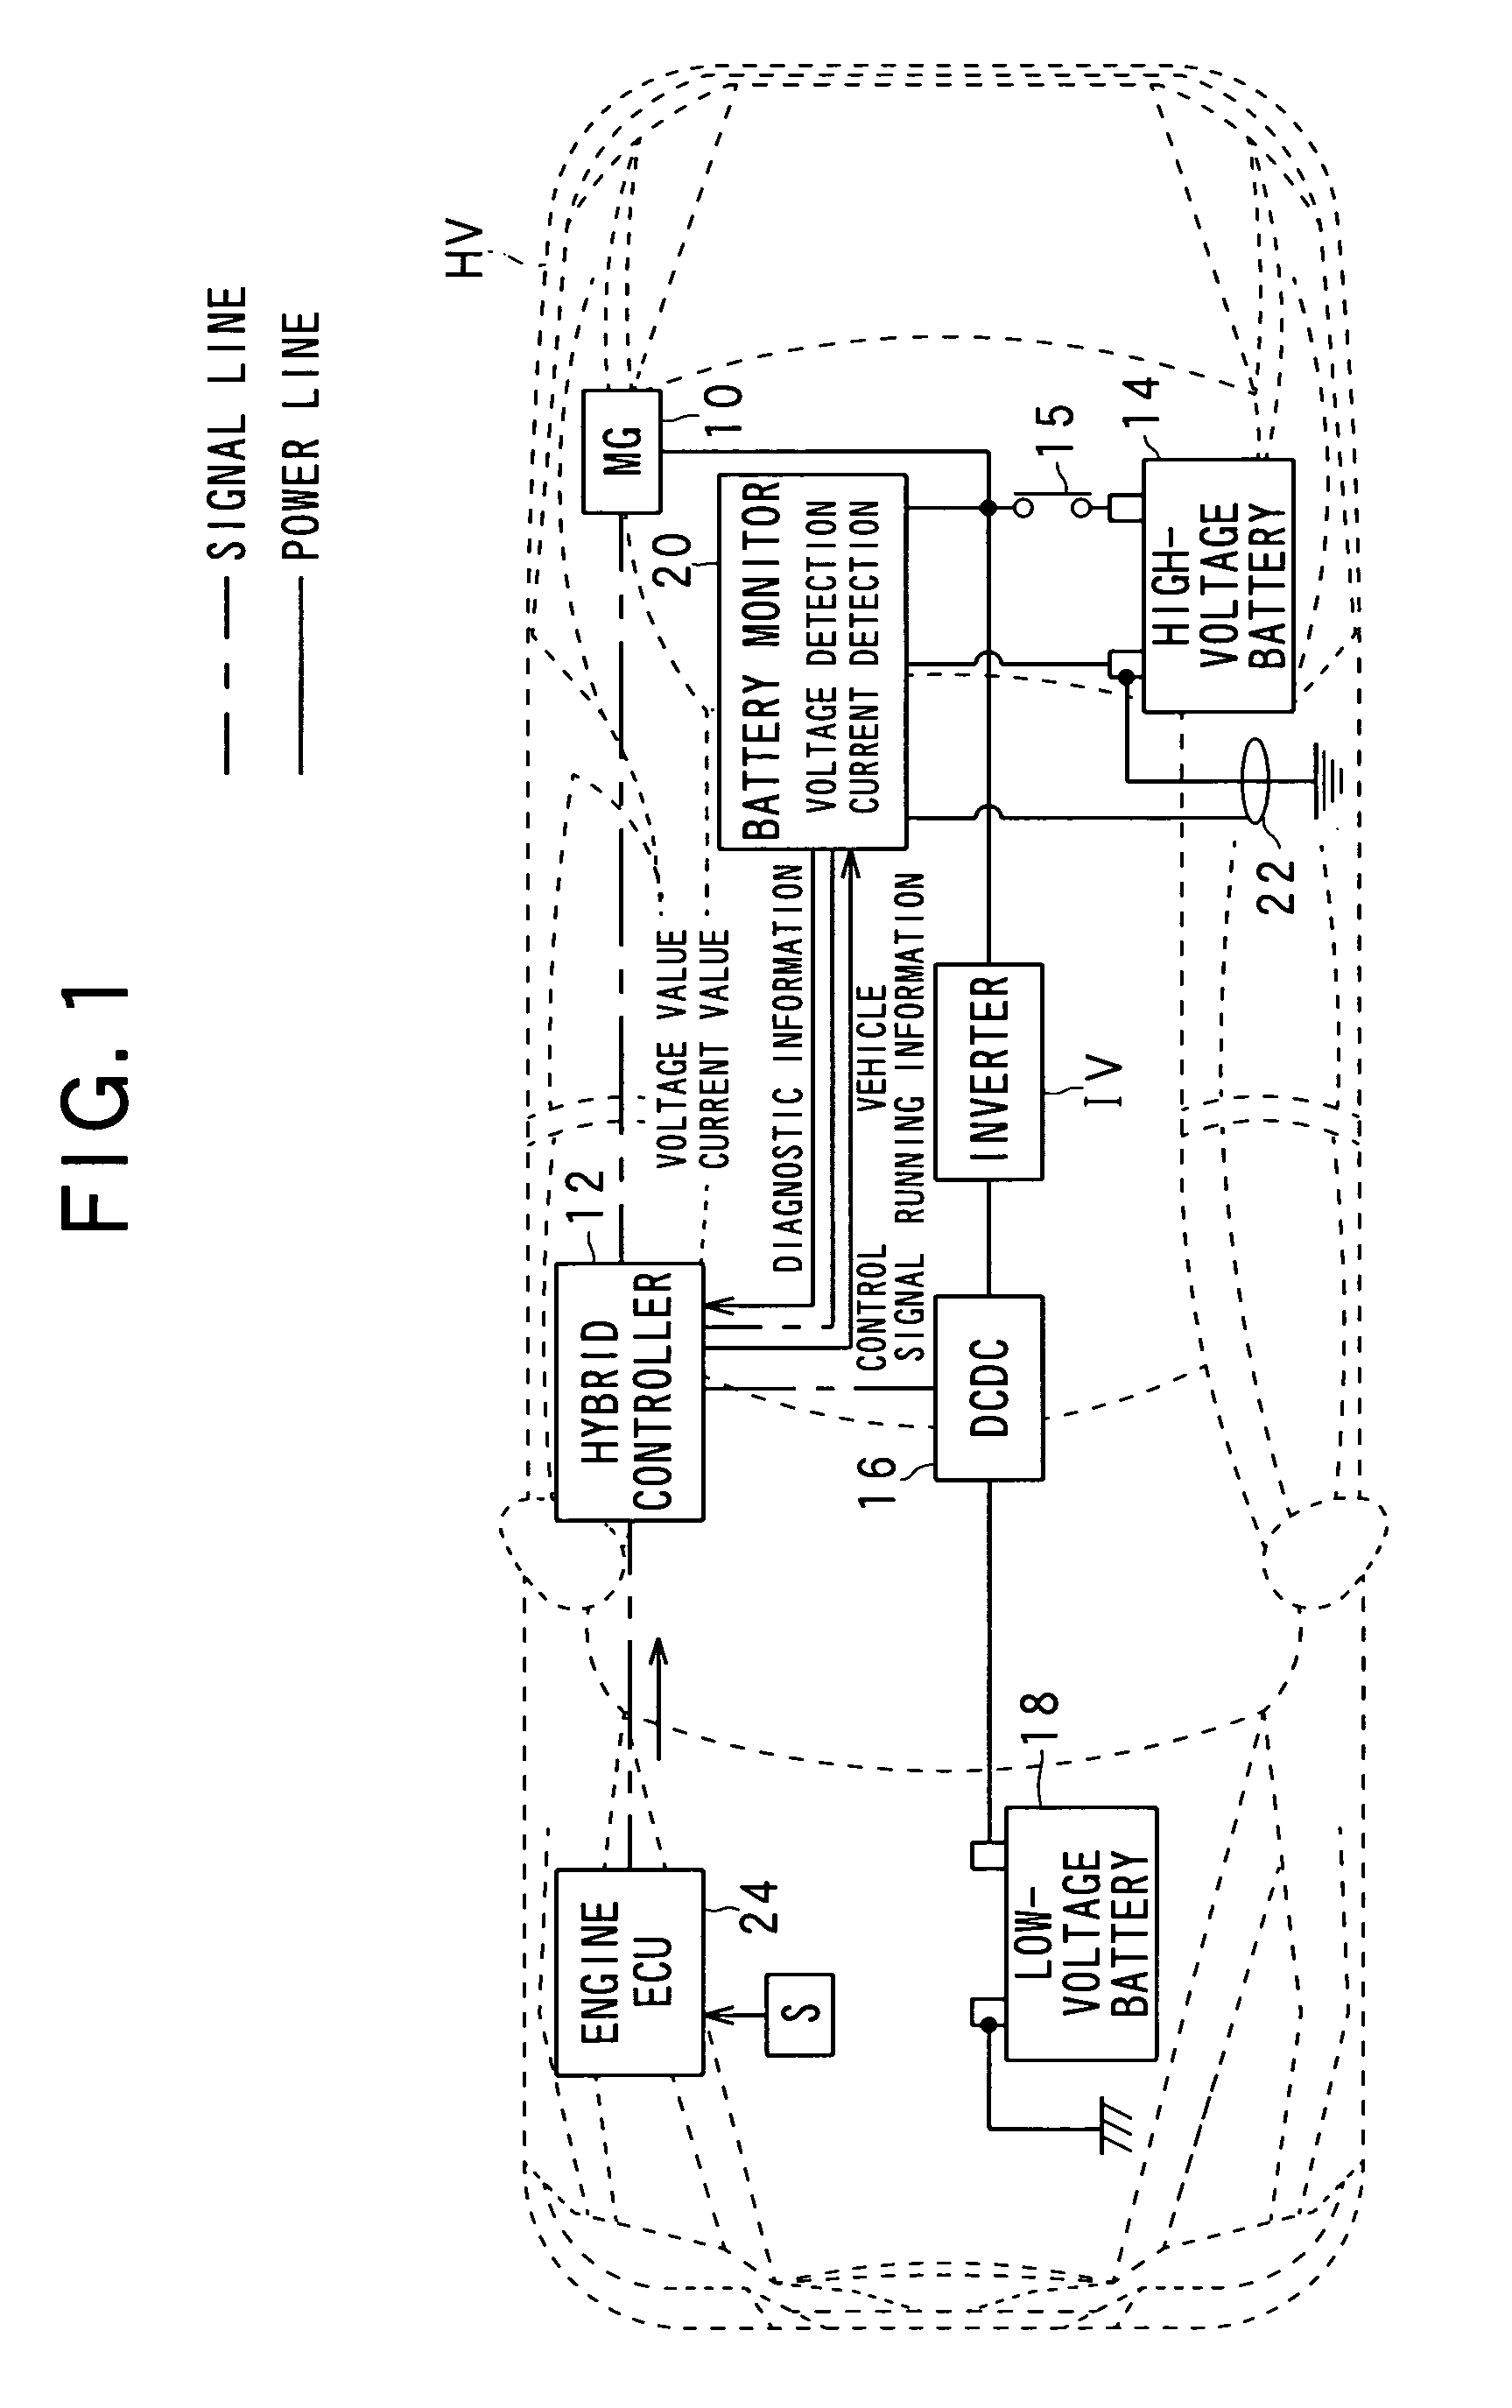 Voltage detecting apparatus with voltage controlled oscillator and battery state control system